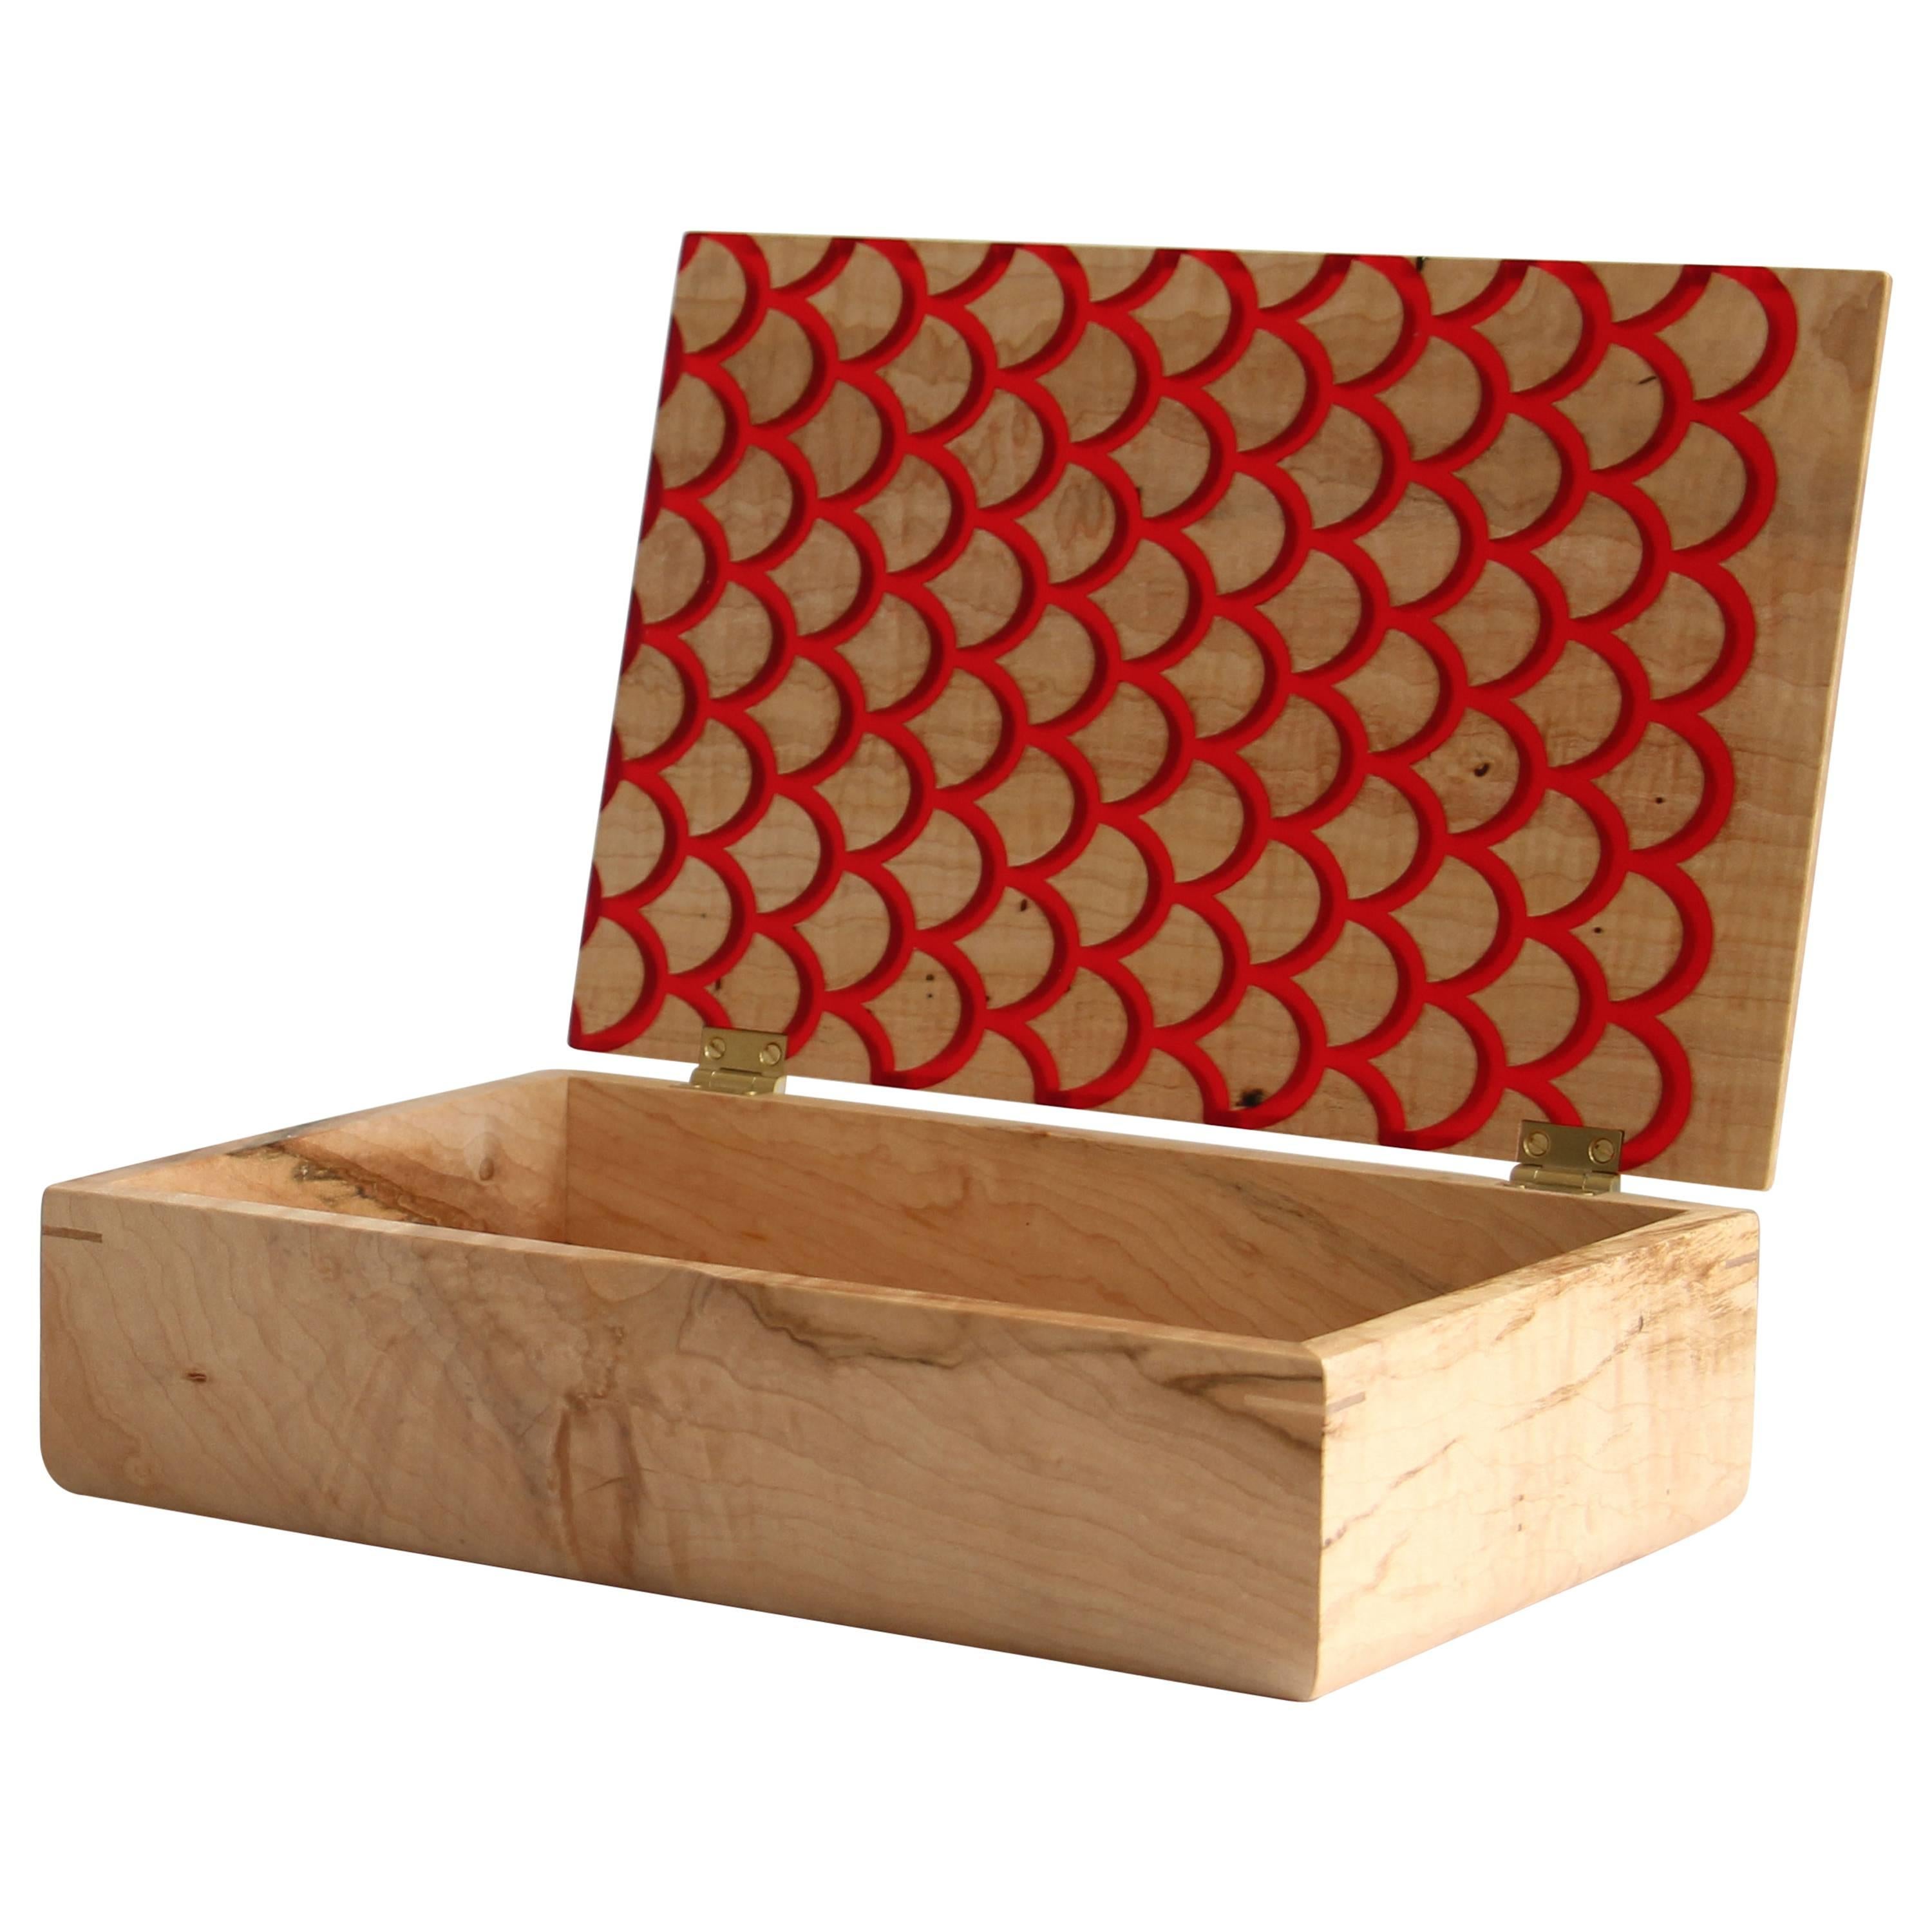 Koi Treasure Box in Figured Maple with Inlaid Resin - In Stock For Sale